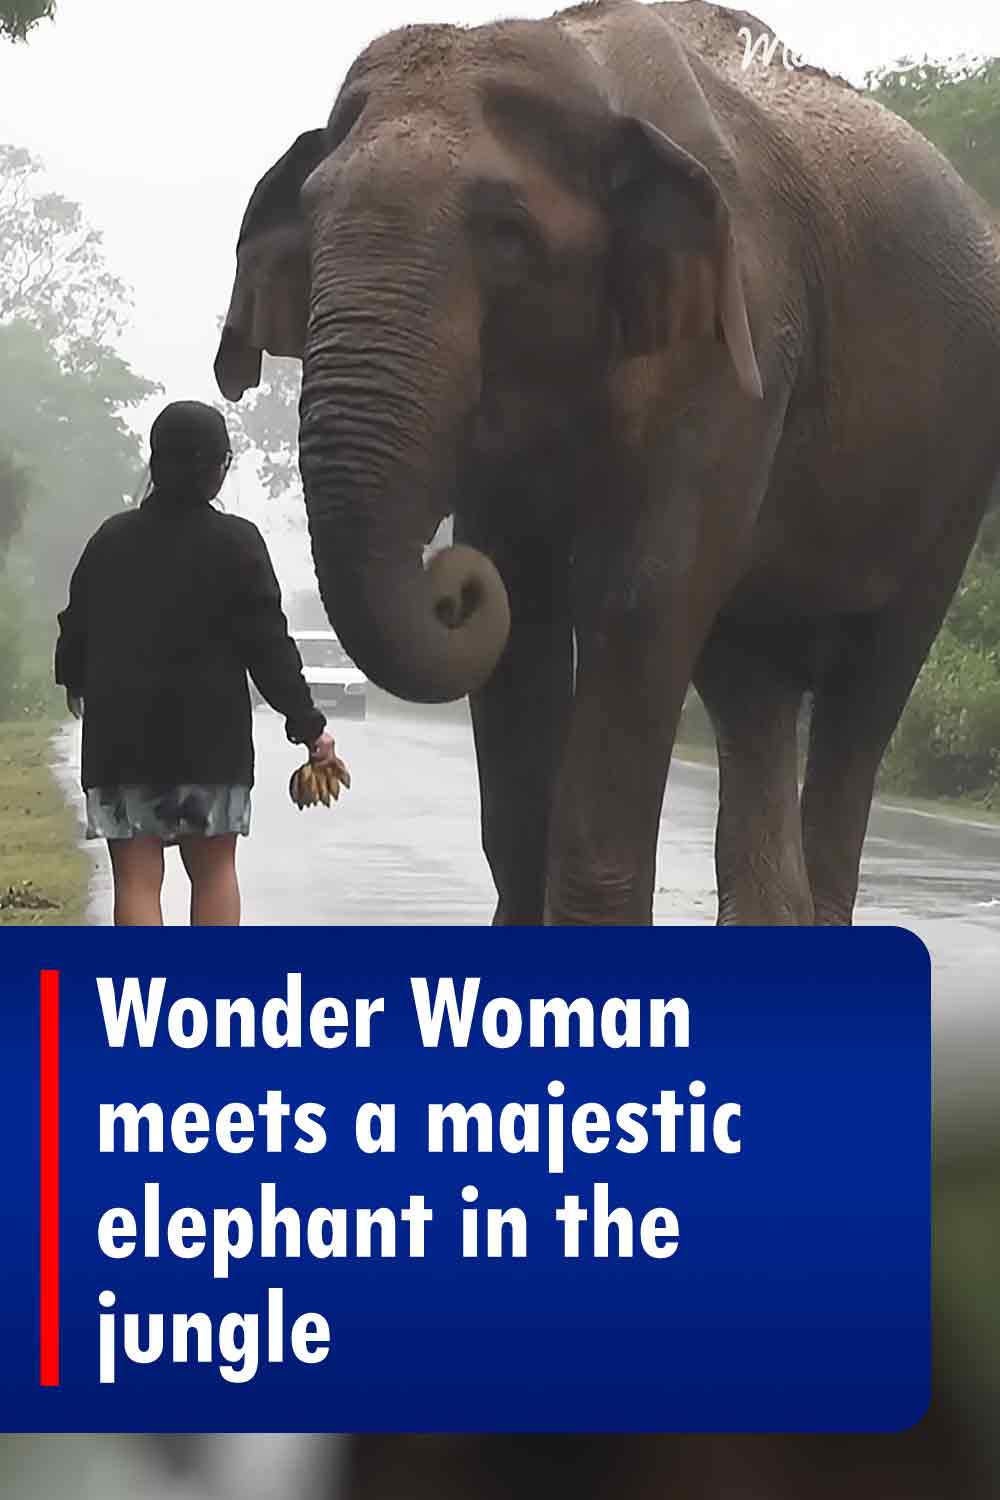 Fearless woman meets a majestic elephant in the jungle